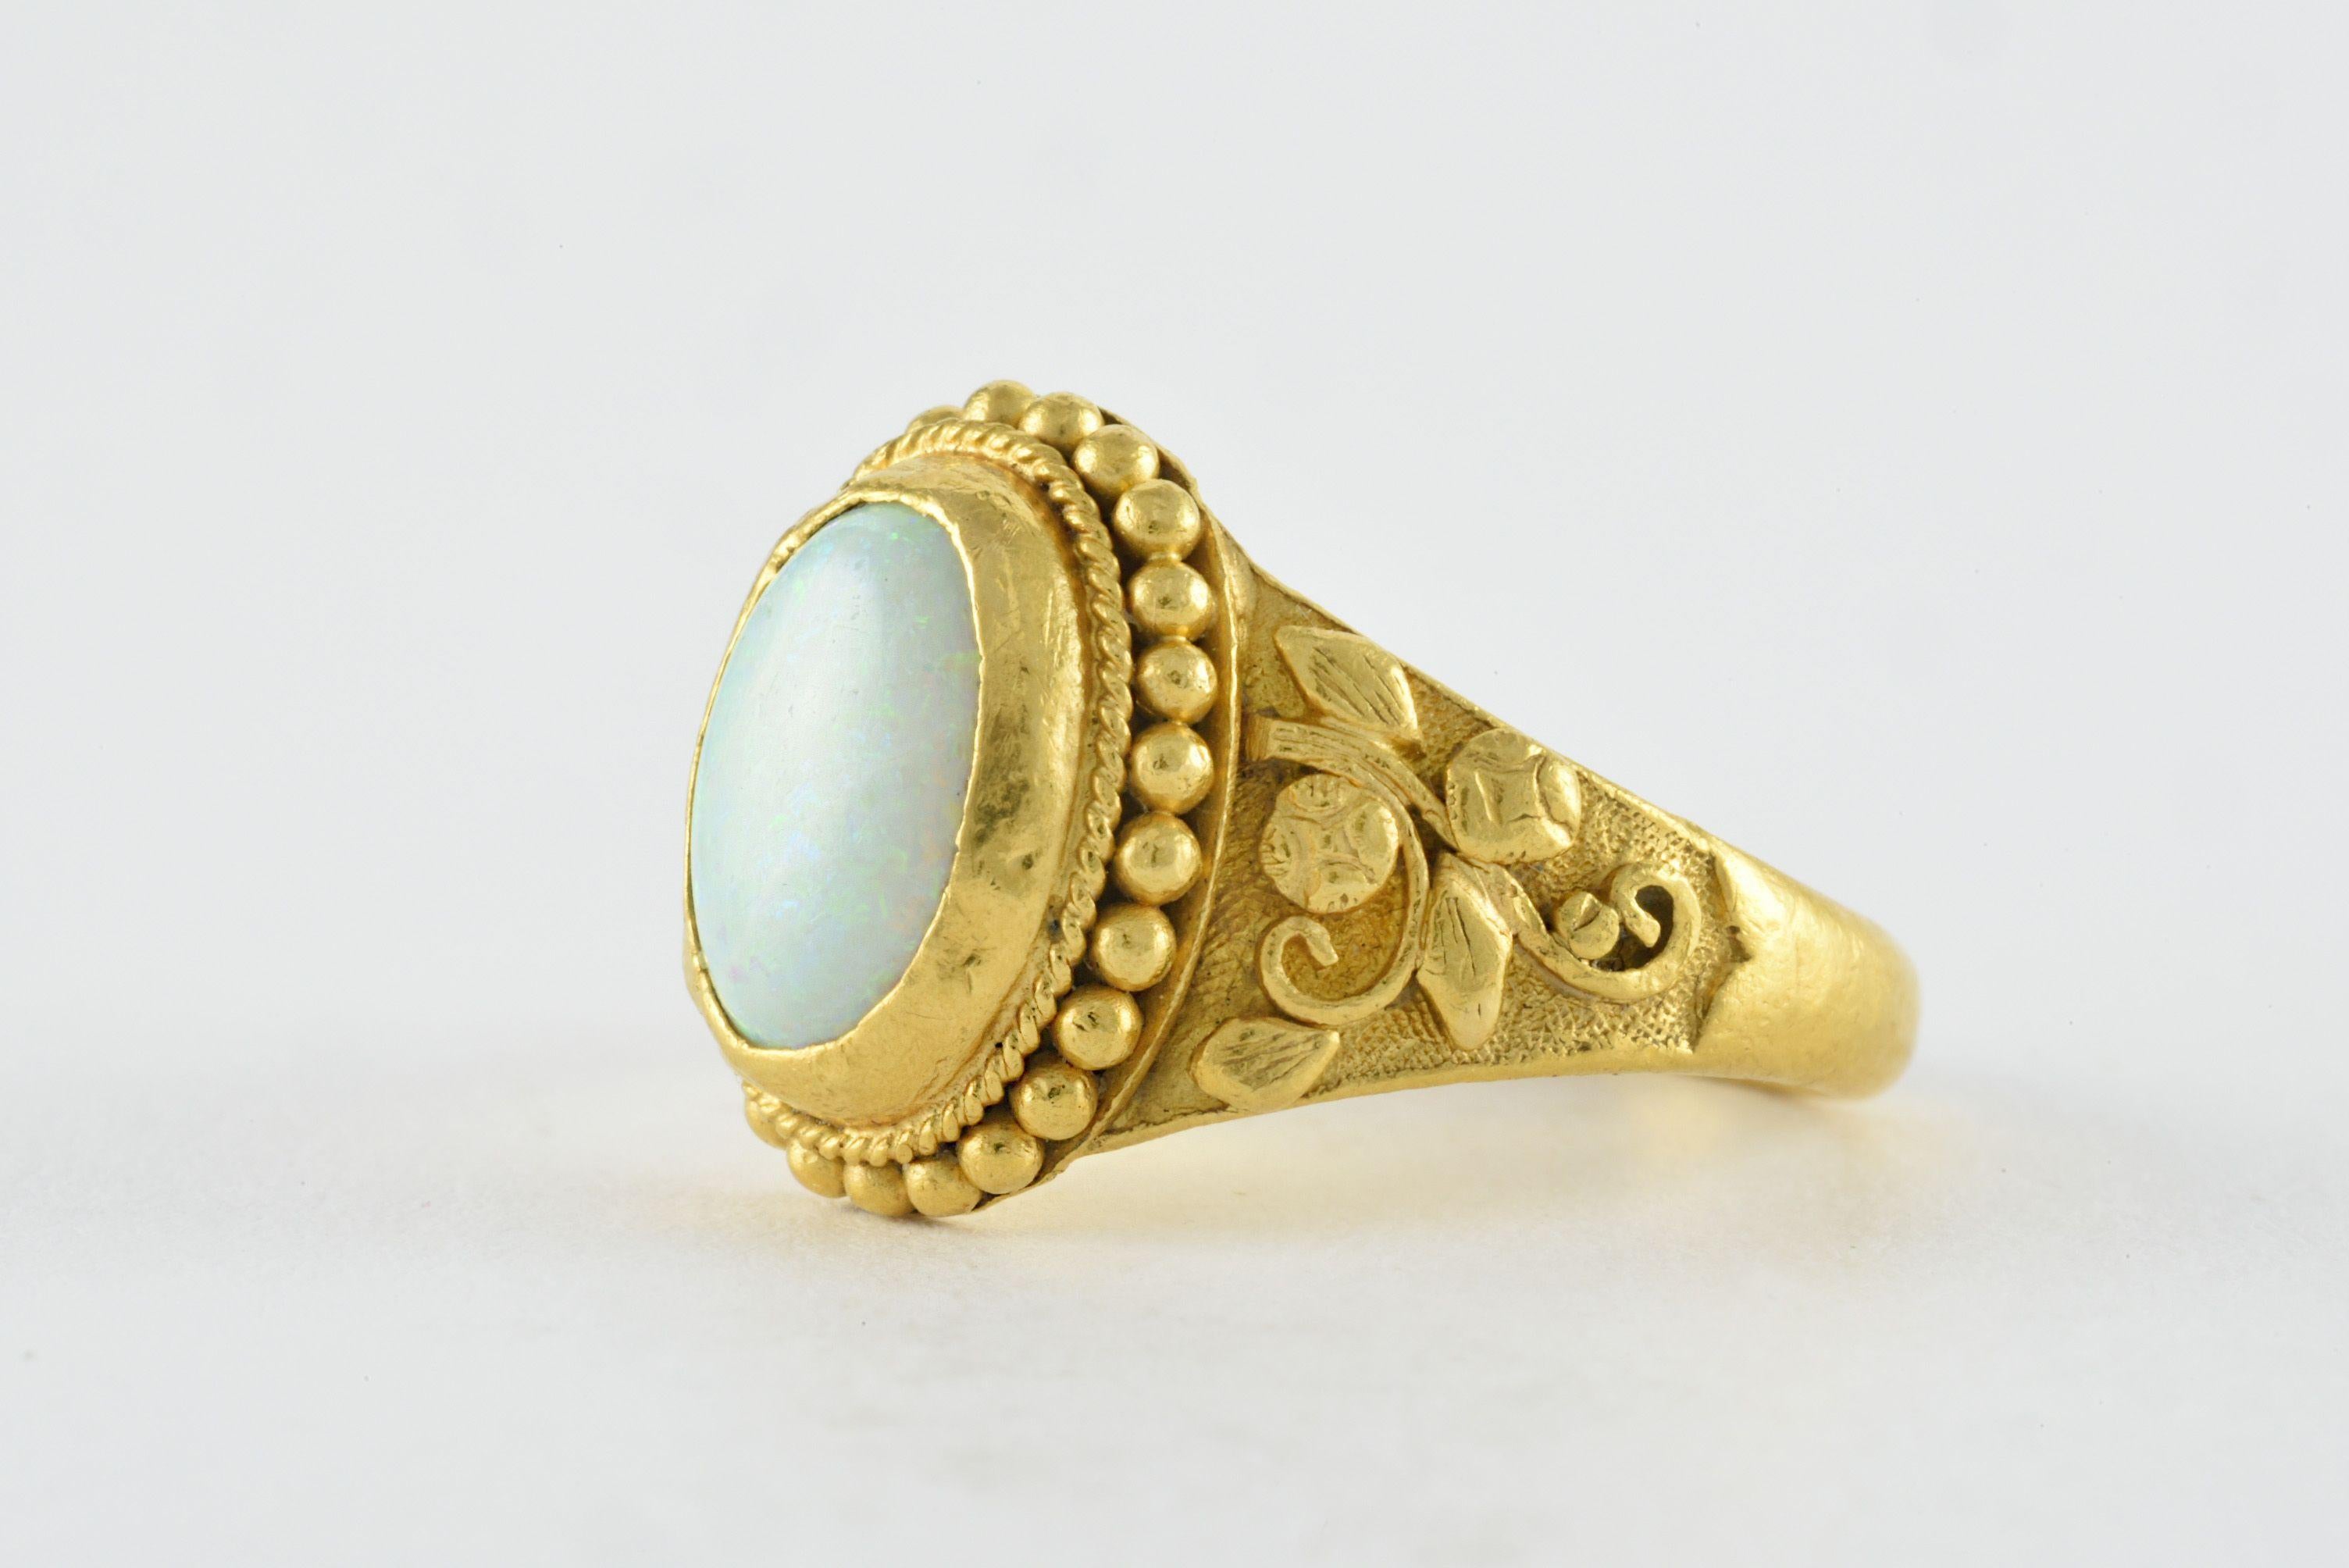 An oval-shaped natural Australian opal measuring 9mm x 7mm is the centerpiece of this beautiful band crafted from 22kt yellow gold and embellished with elaborate hand engraving. 